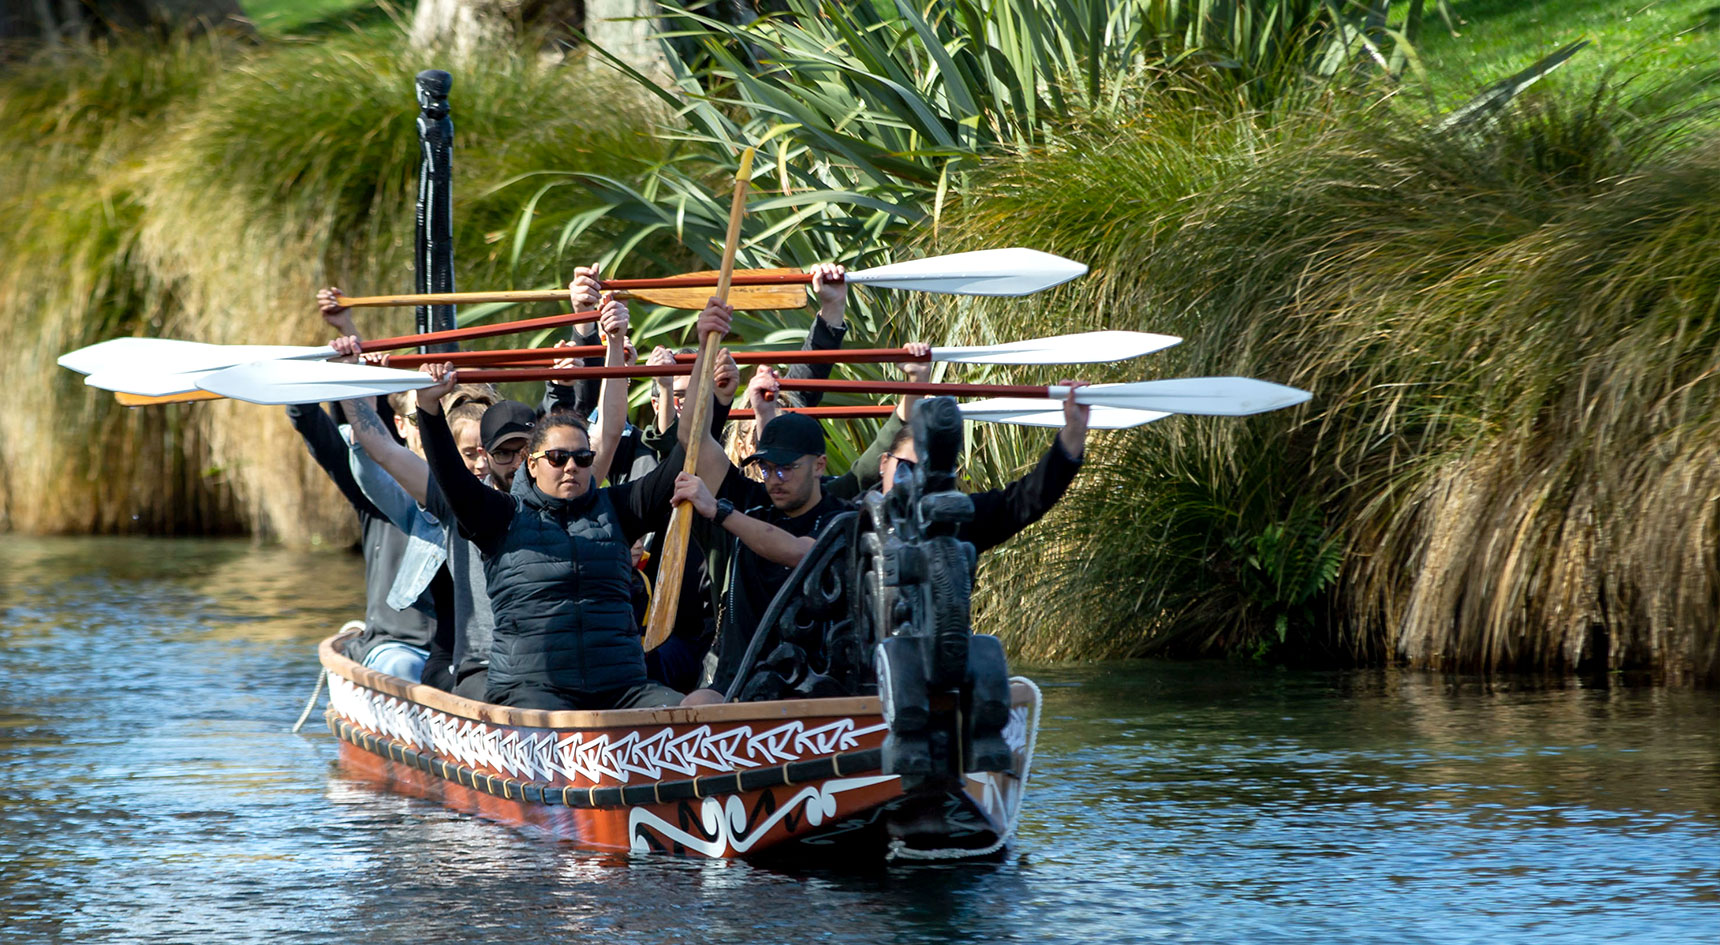 A group of people holding oars in a traditional canoe